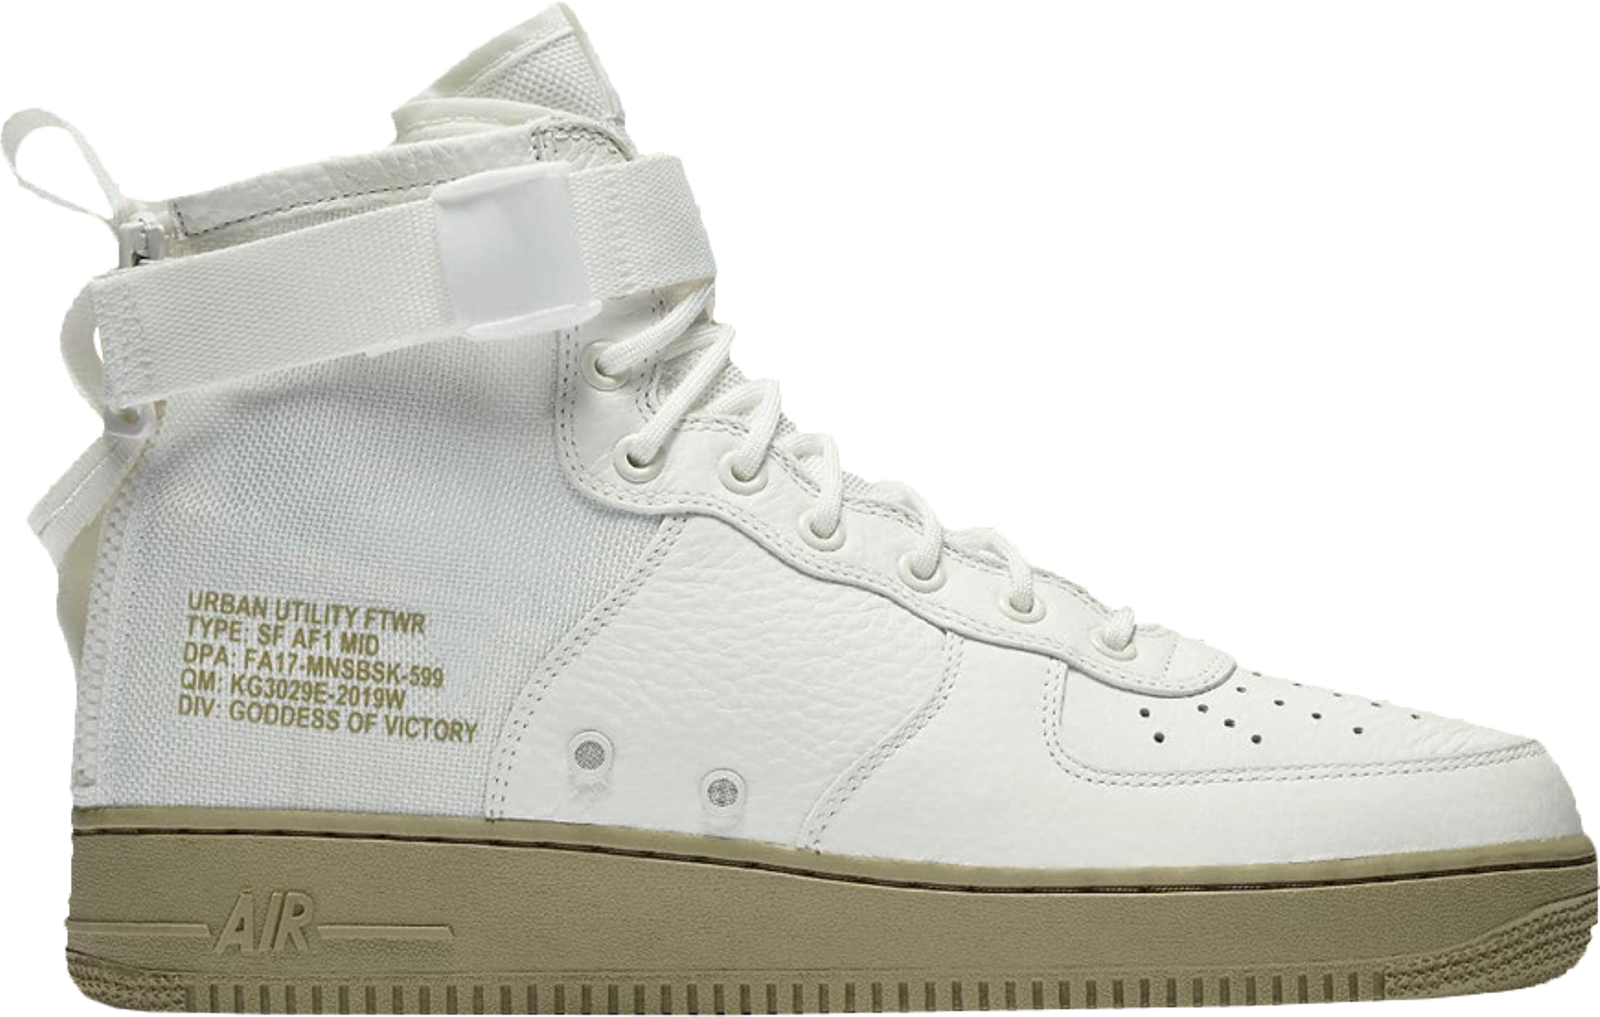 Buy SF Air Force 1 Mid 'Olive Ivory' - 917753 101 | GOAT